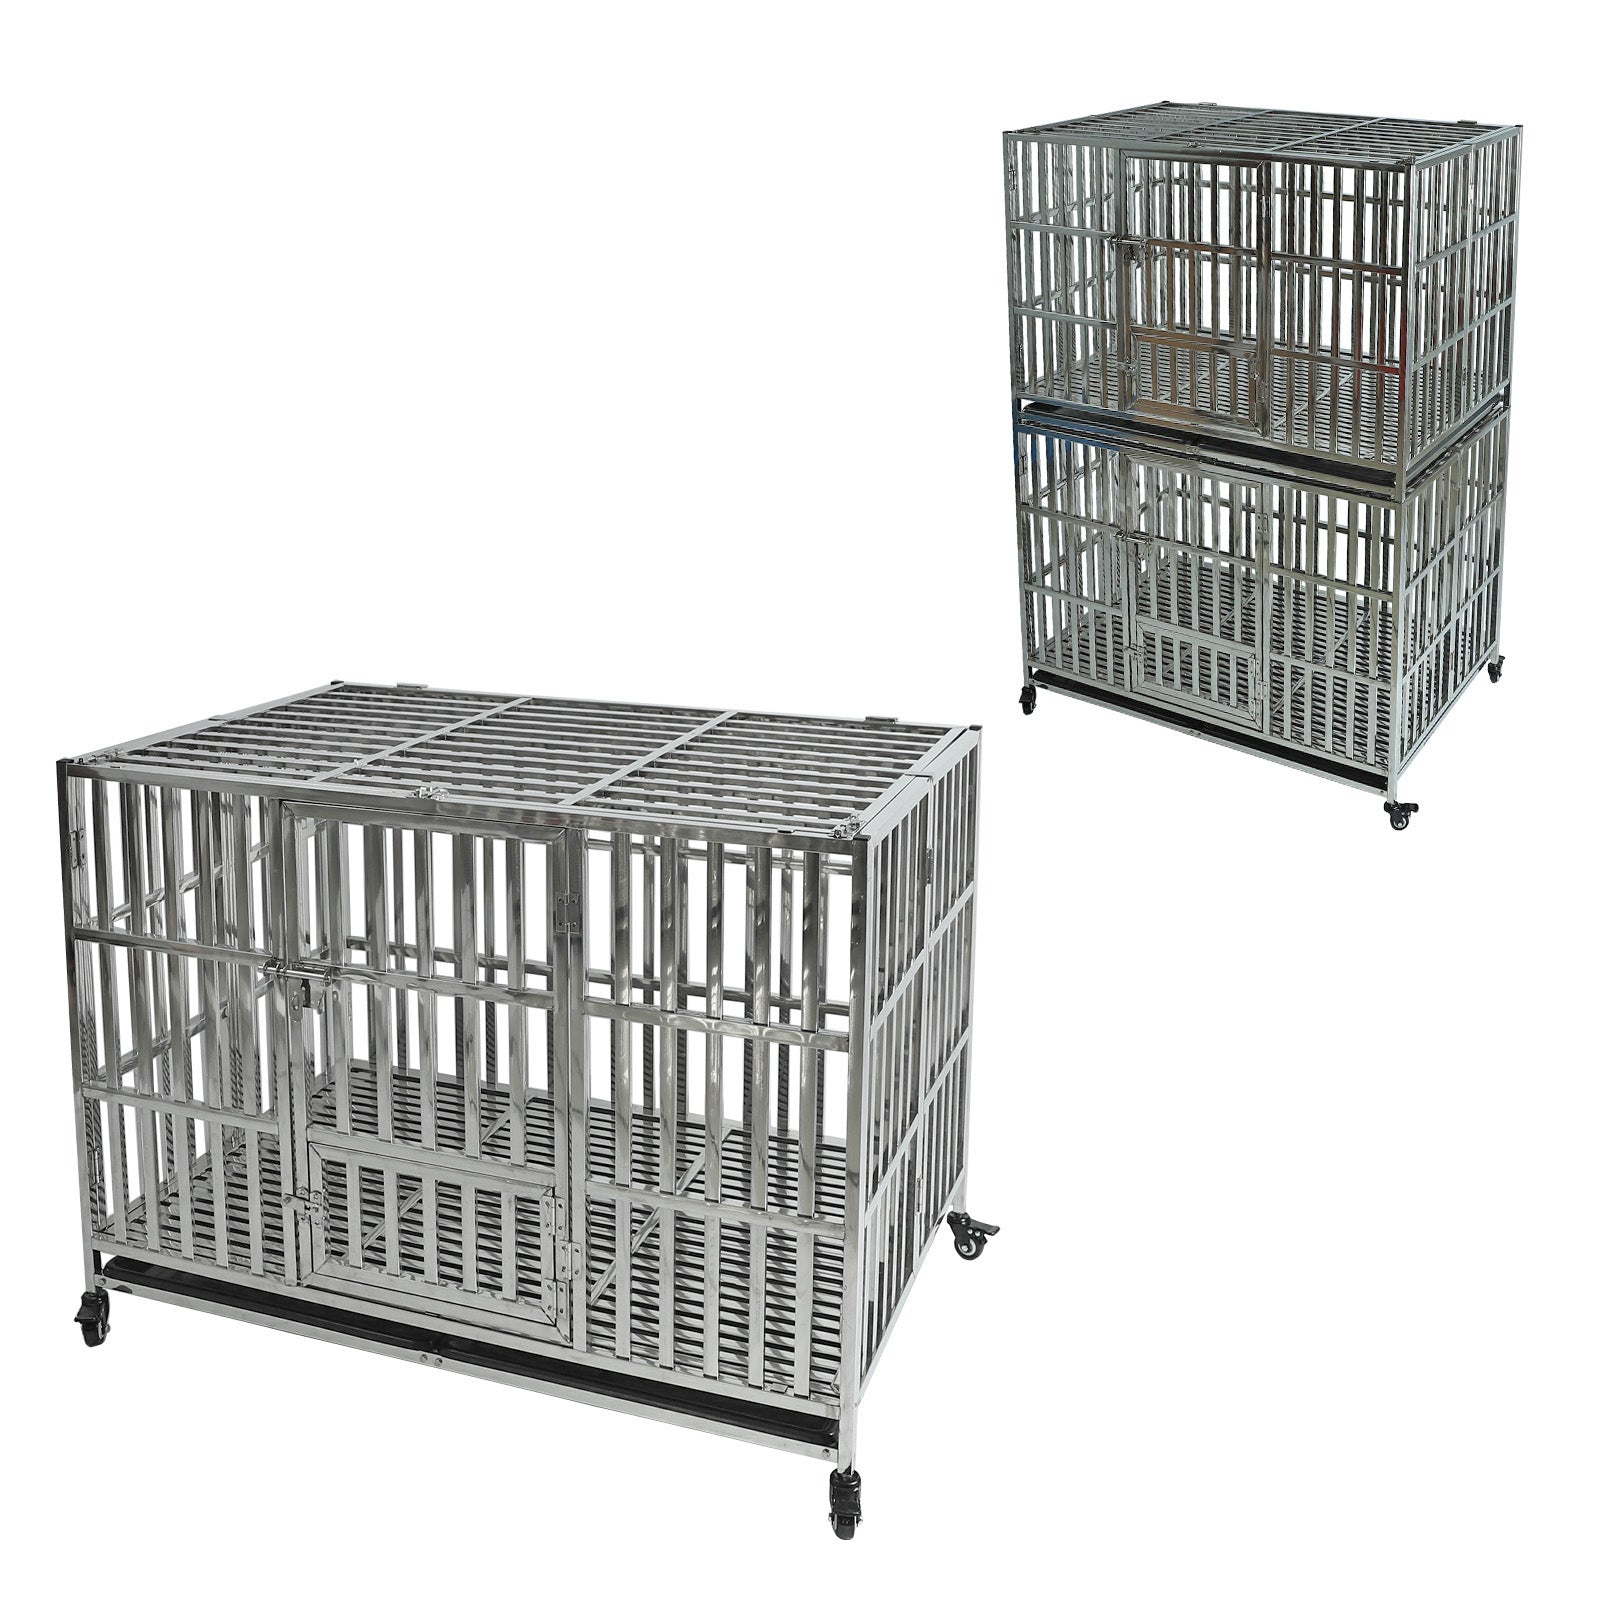  Dog Crate Cage for Large Dogs Heavy Duty 48 Inches Dog Kennel  Pet Playpen for Training Indoor Outdoor with Plastic Tray Double Doors &  Locks Design : Pet Supplies